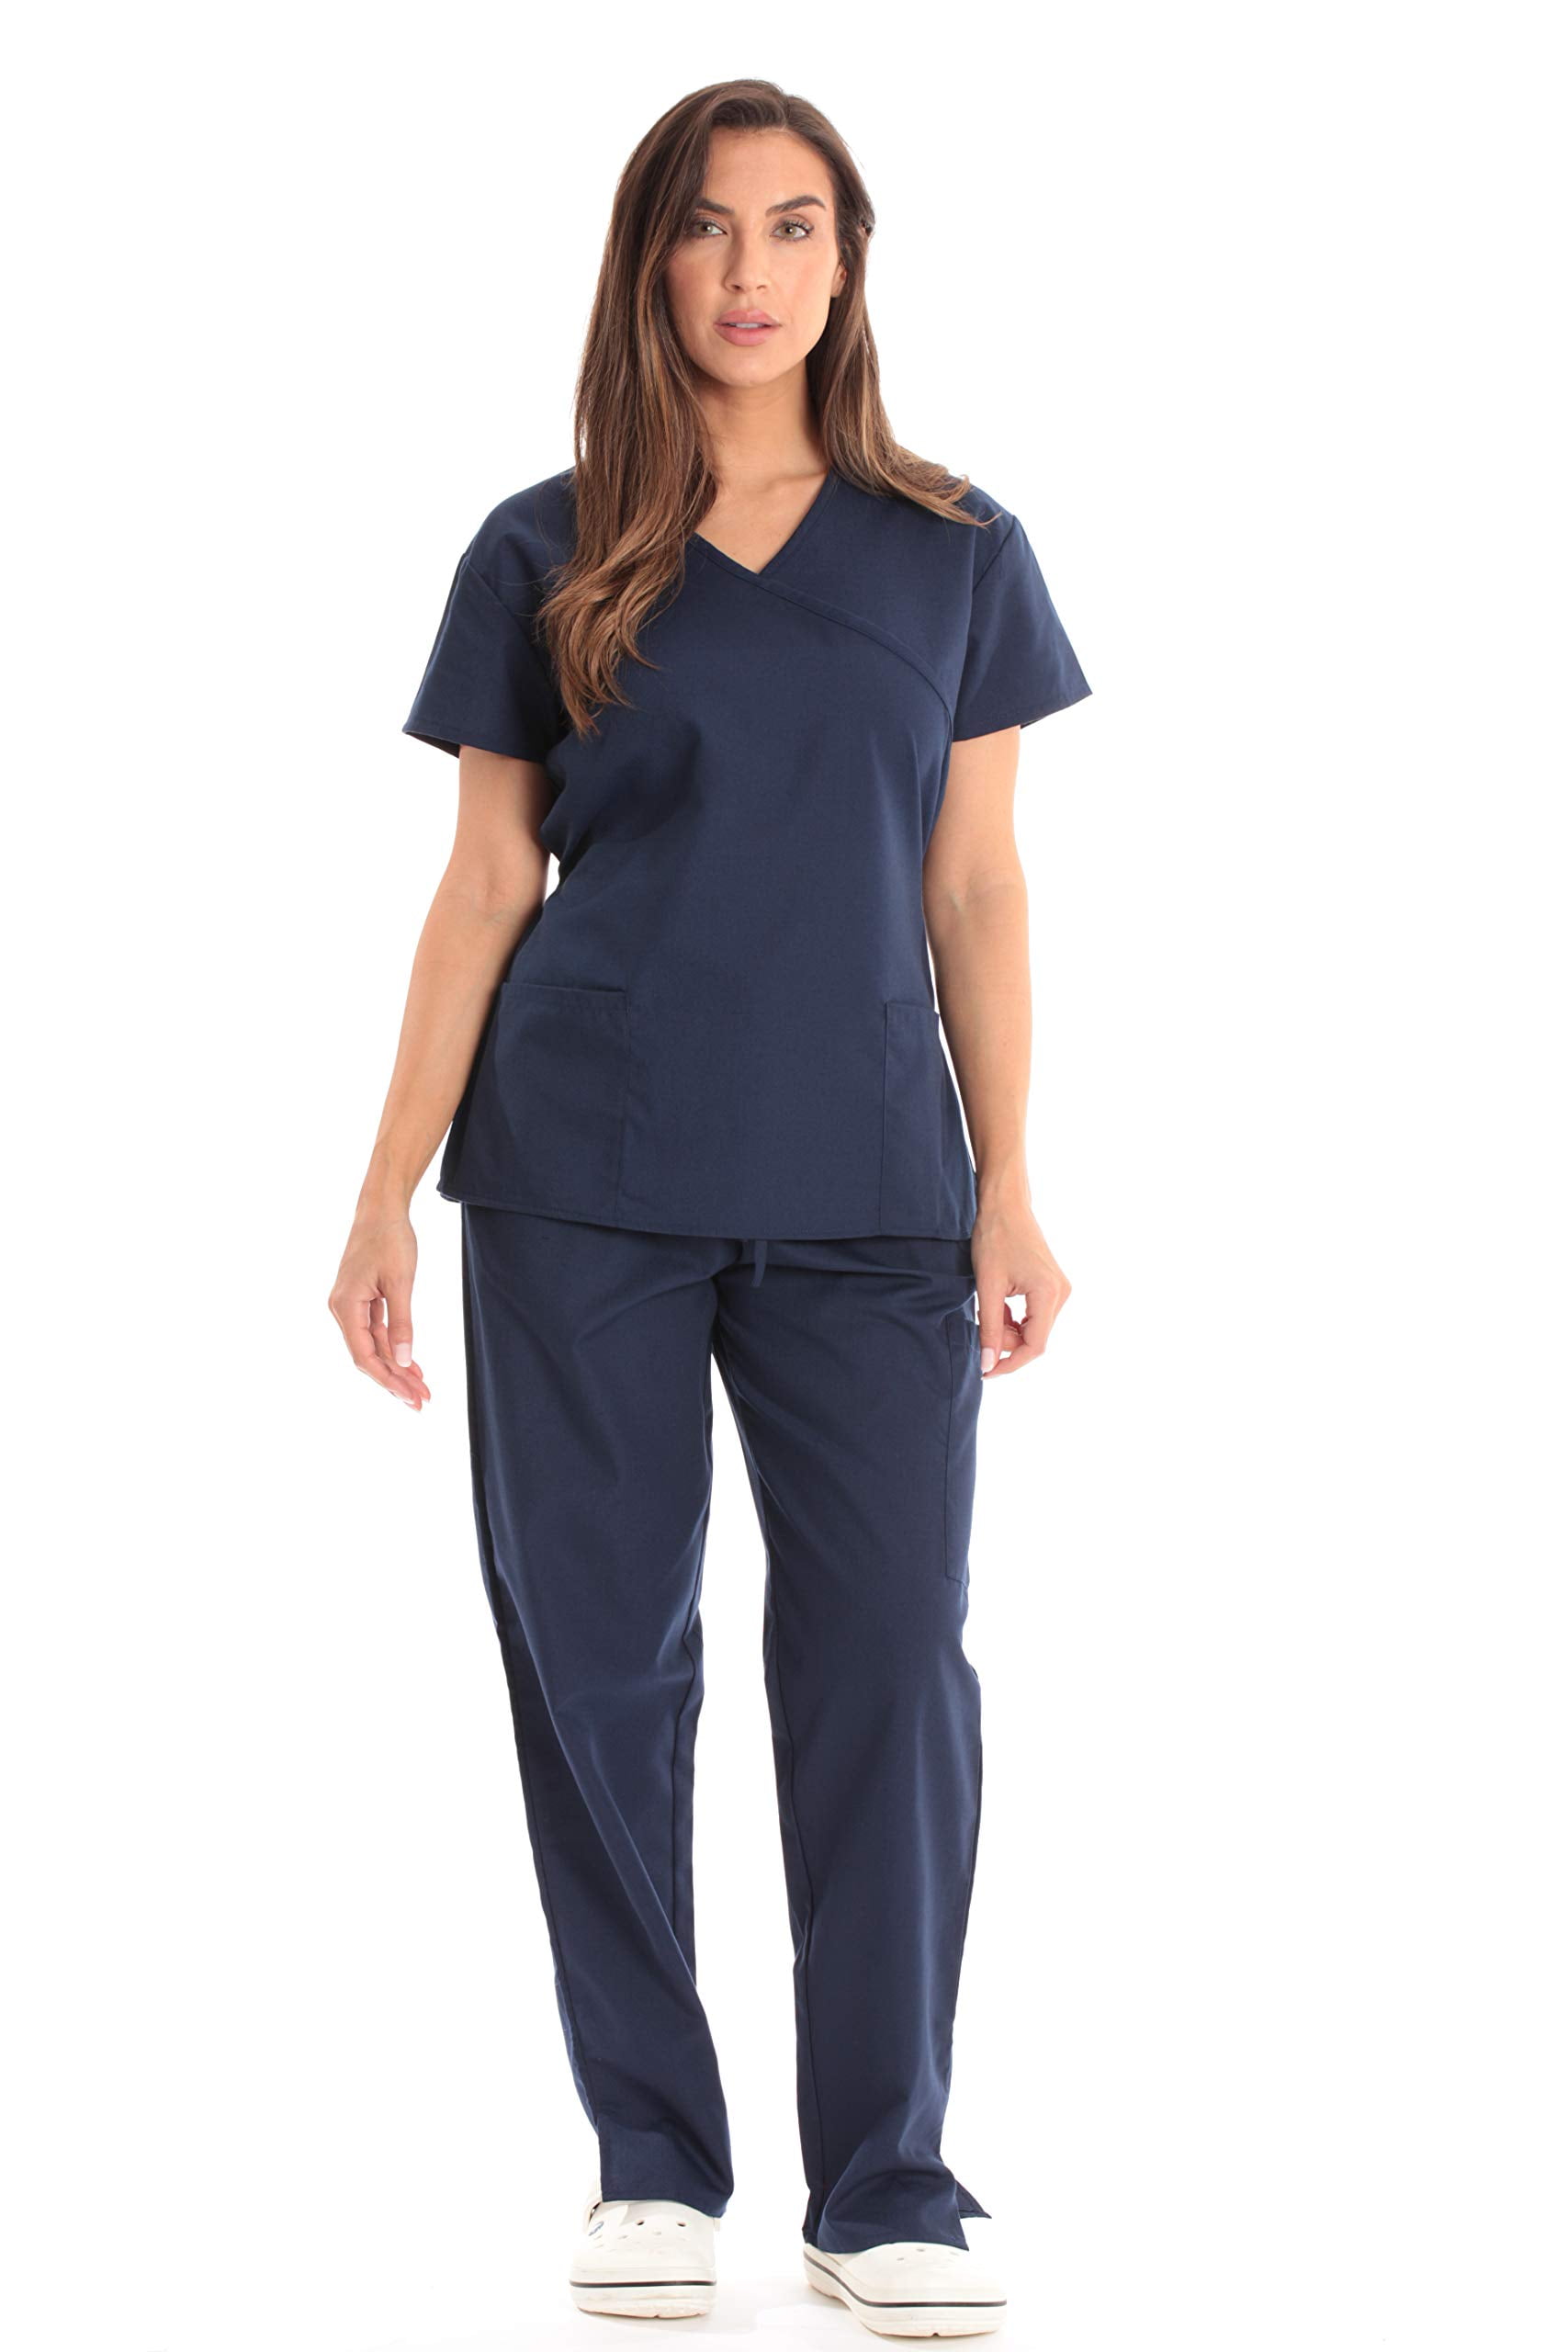 Just Love Women's Medical Scrub Sets - Mock Wrap Scrubs with ...